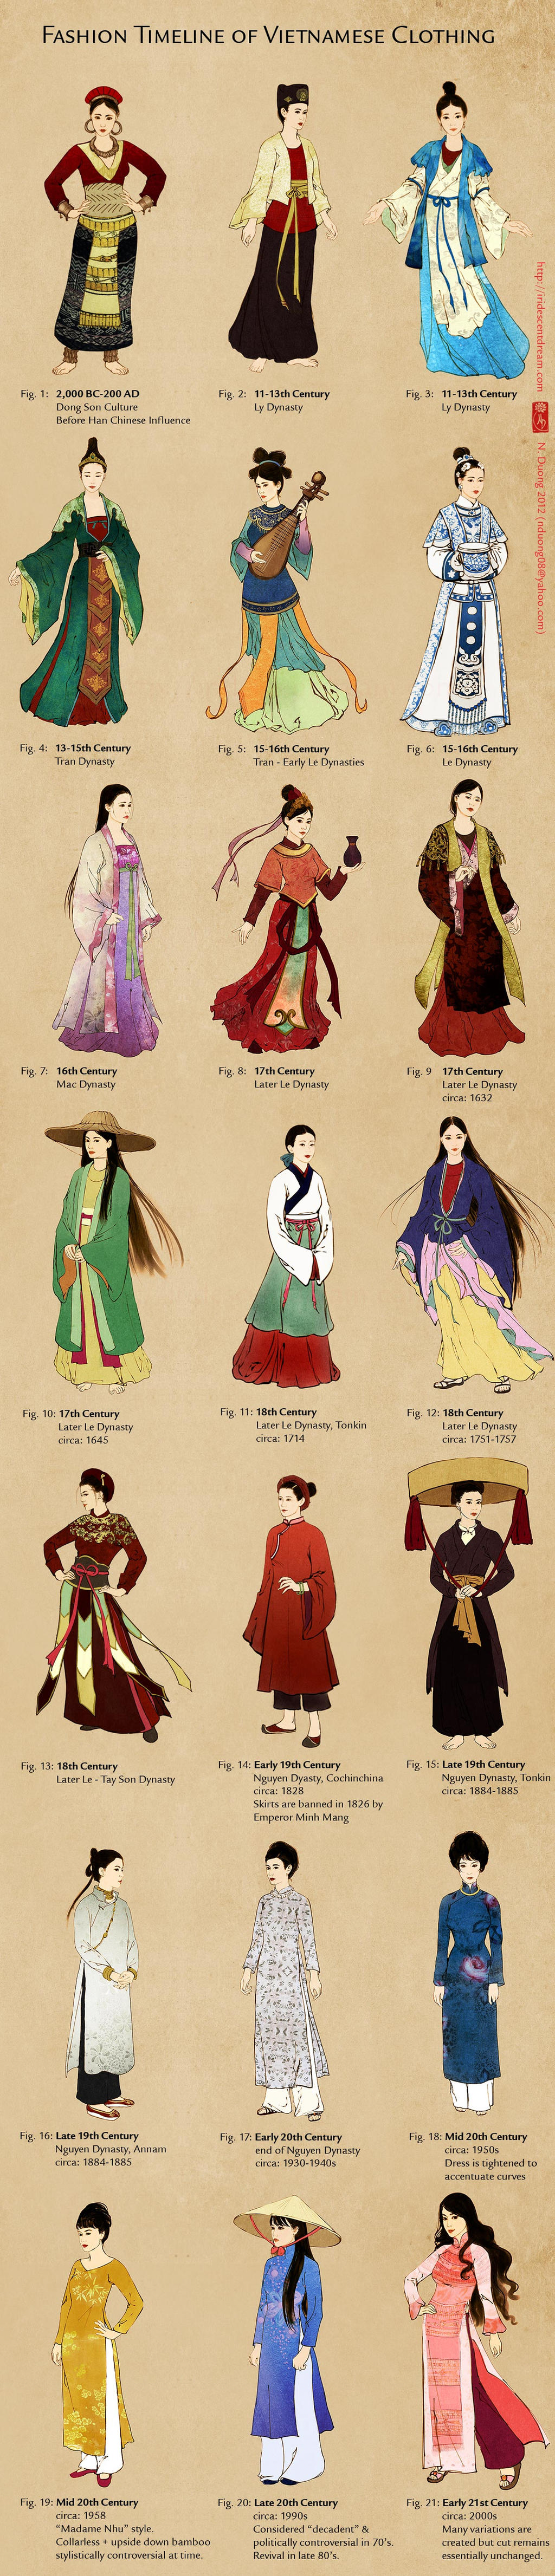 evolution_of_vietnamese_clothing__and_ao_dai__by_lilsuika-d4rfo2y.jpg